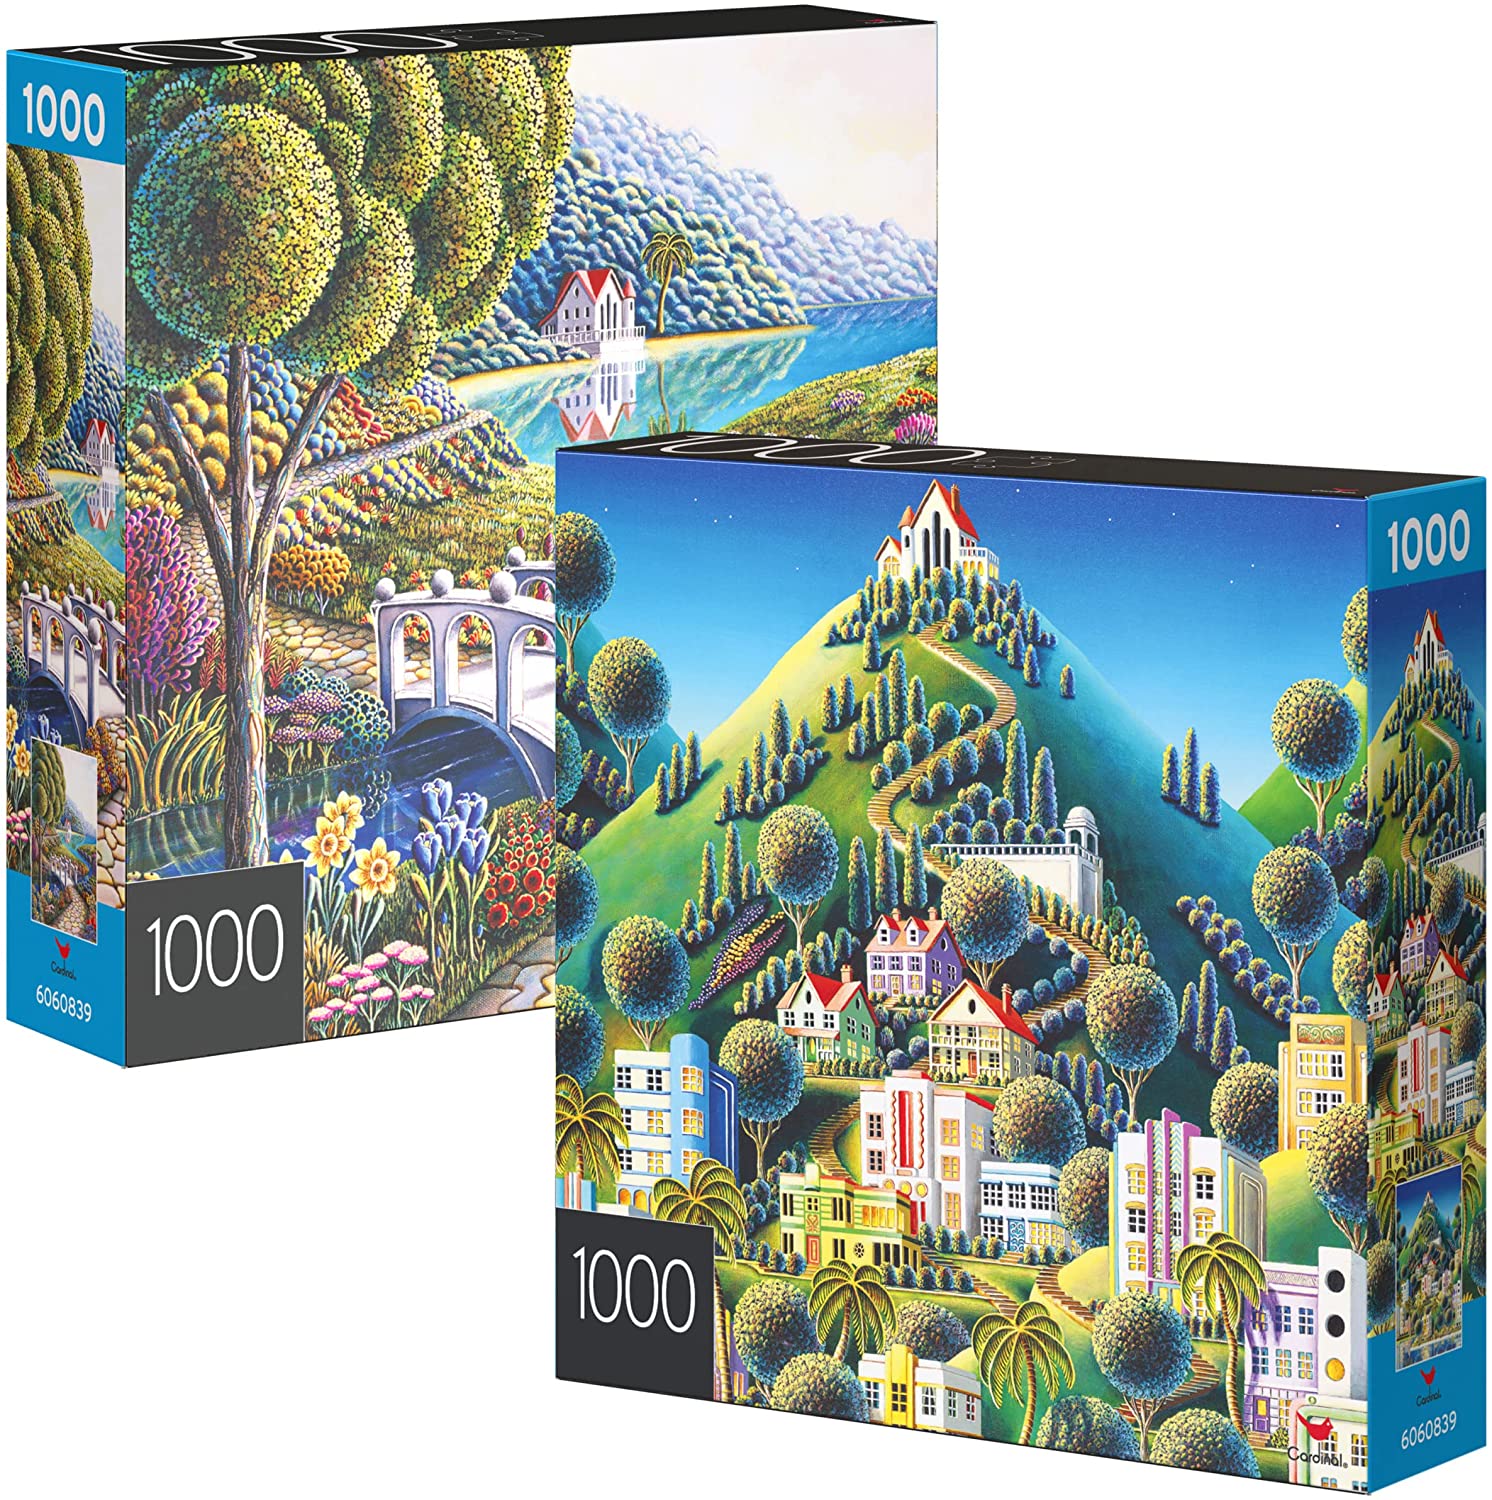 2-Pack 1,000-Pc Spin Master Jigsaw Puzzles (Daffodils & Hidden Village) $6.85 + Free Shipping w/ Amazon Prime or Orders $25+